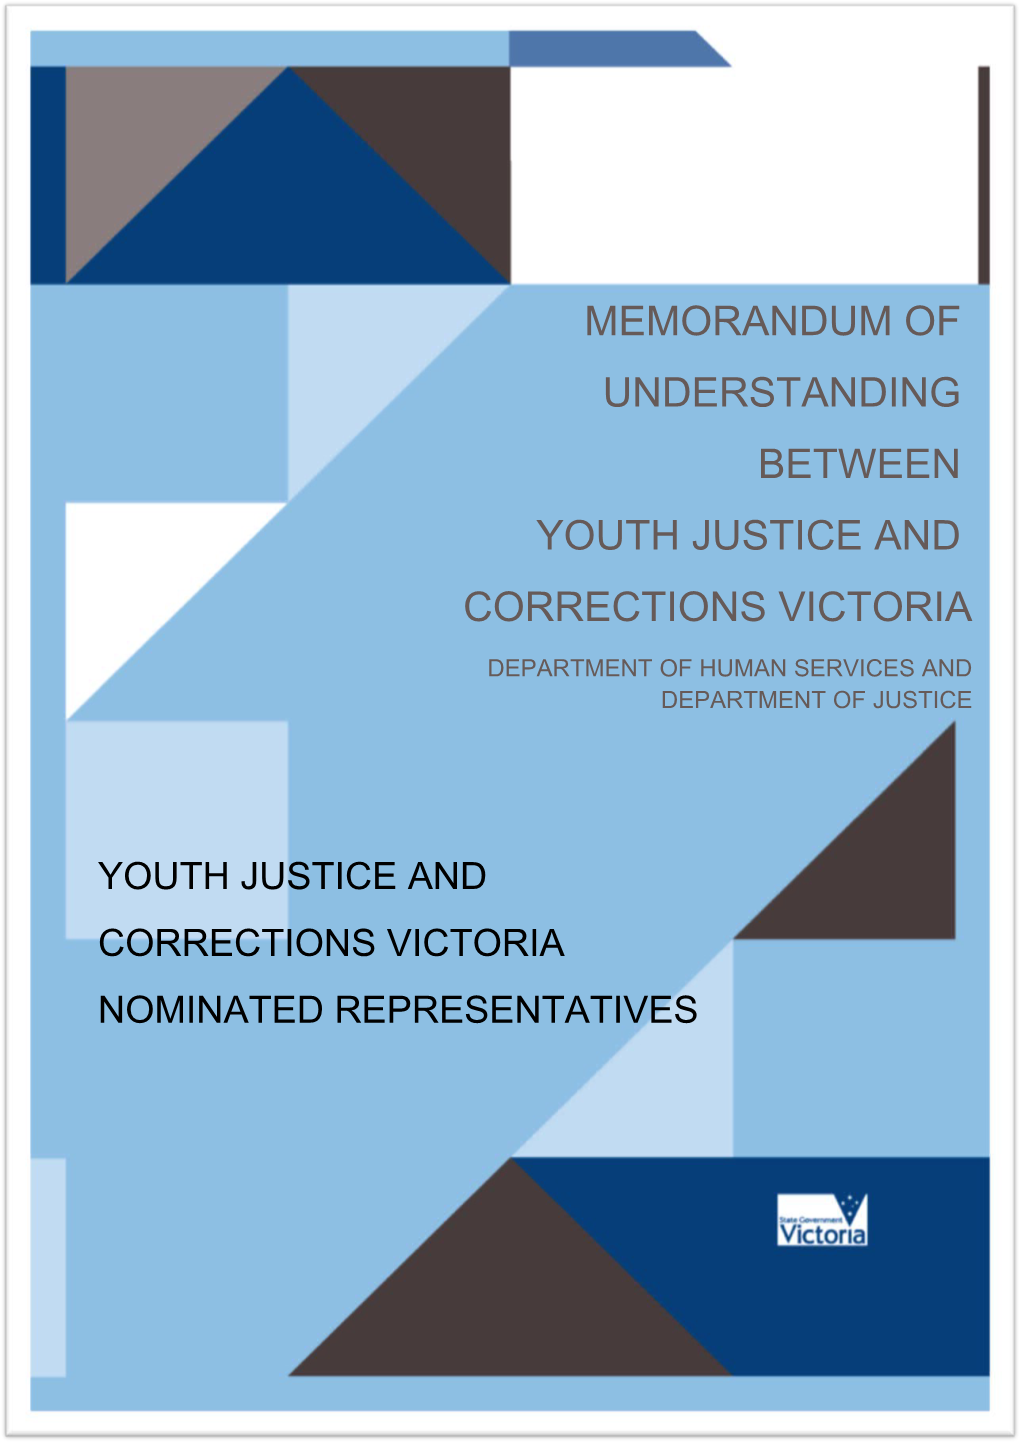 Memorandum of Understanding Nominated Representatives from Youth Justice & Corrections Victoria